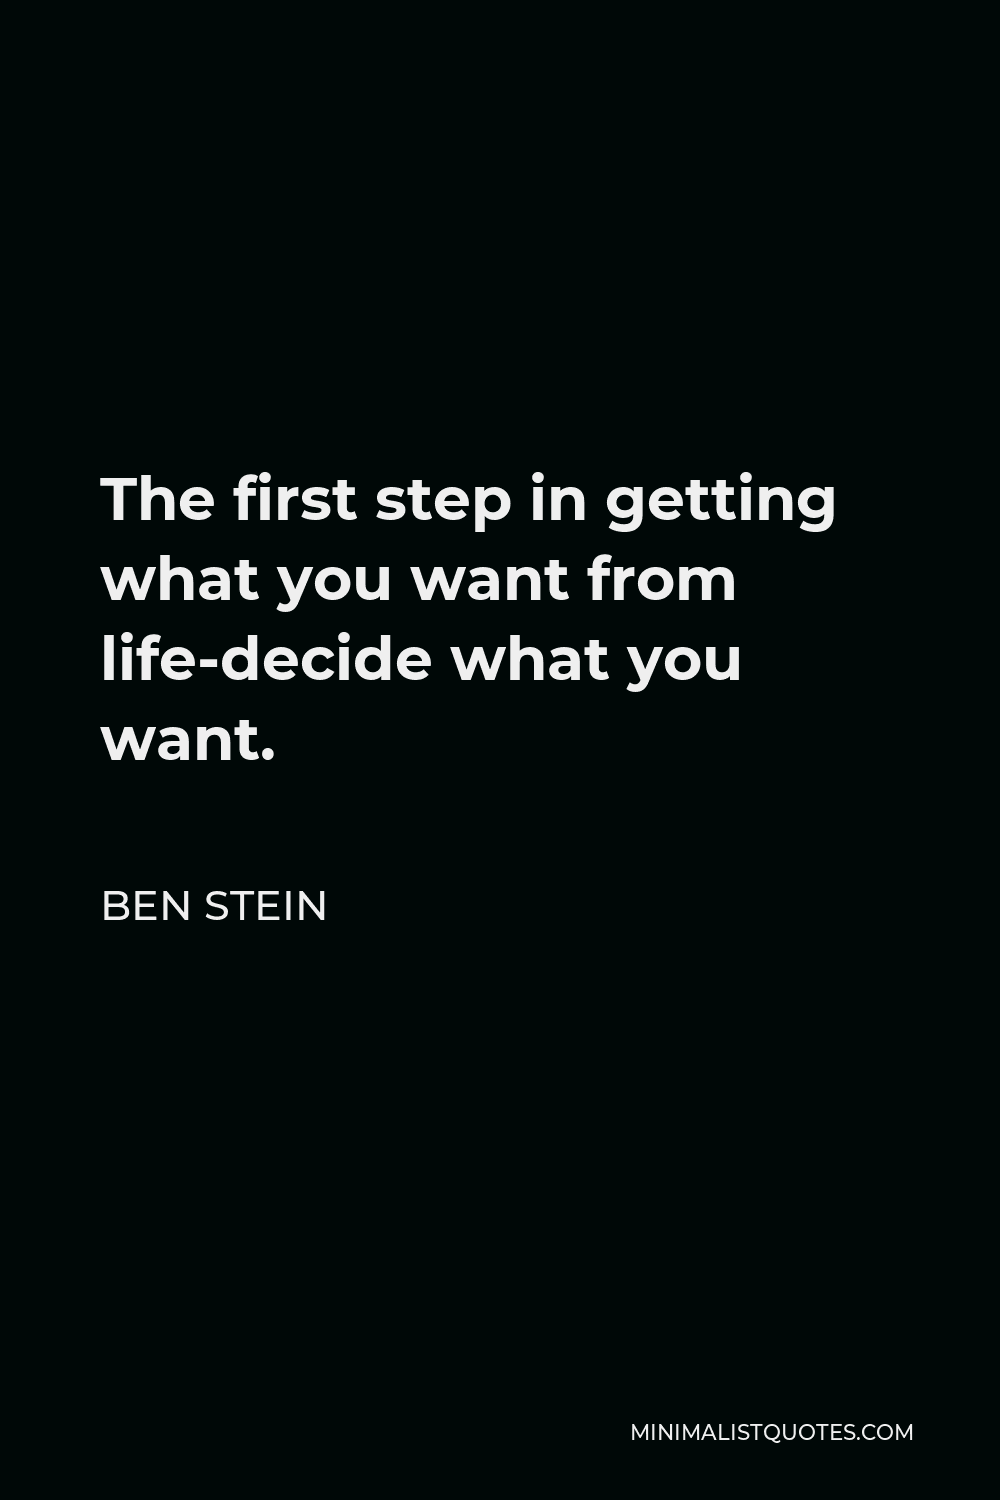 Ben Stein Quote - The first step in getting what you want from life-decide what you want.